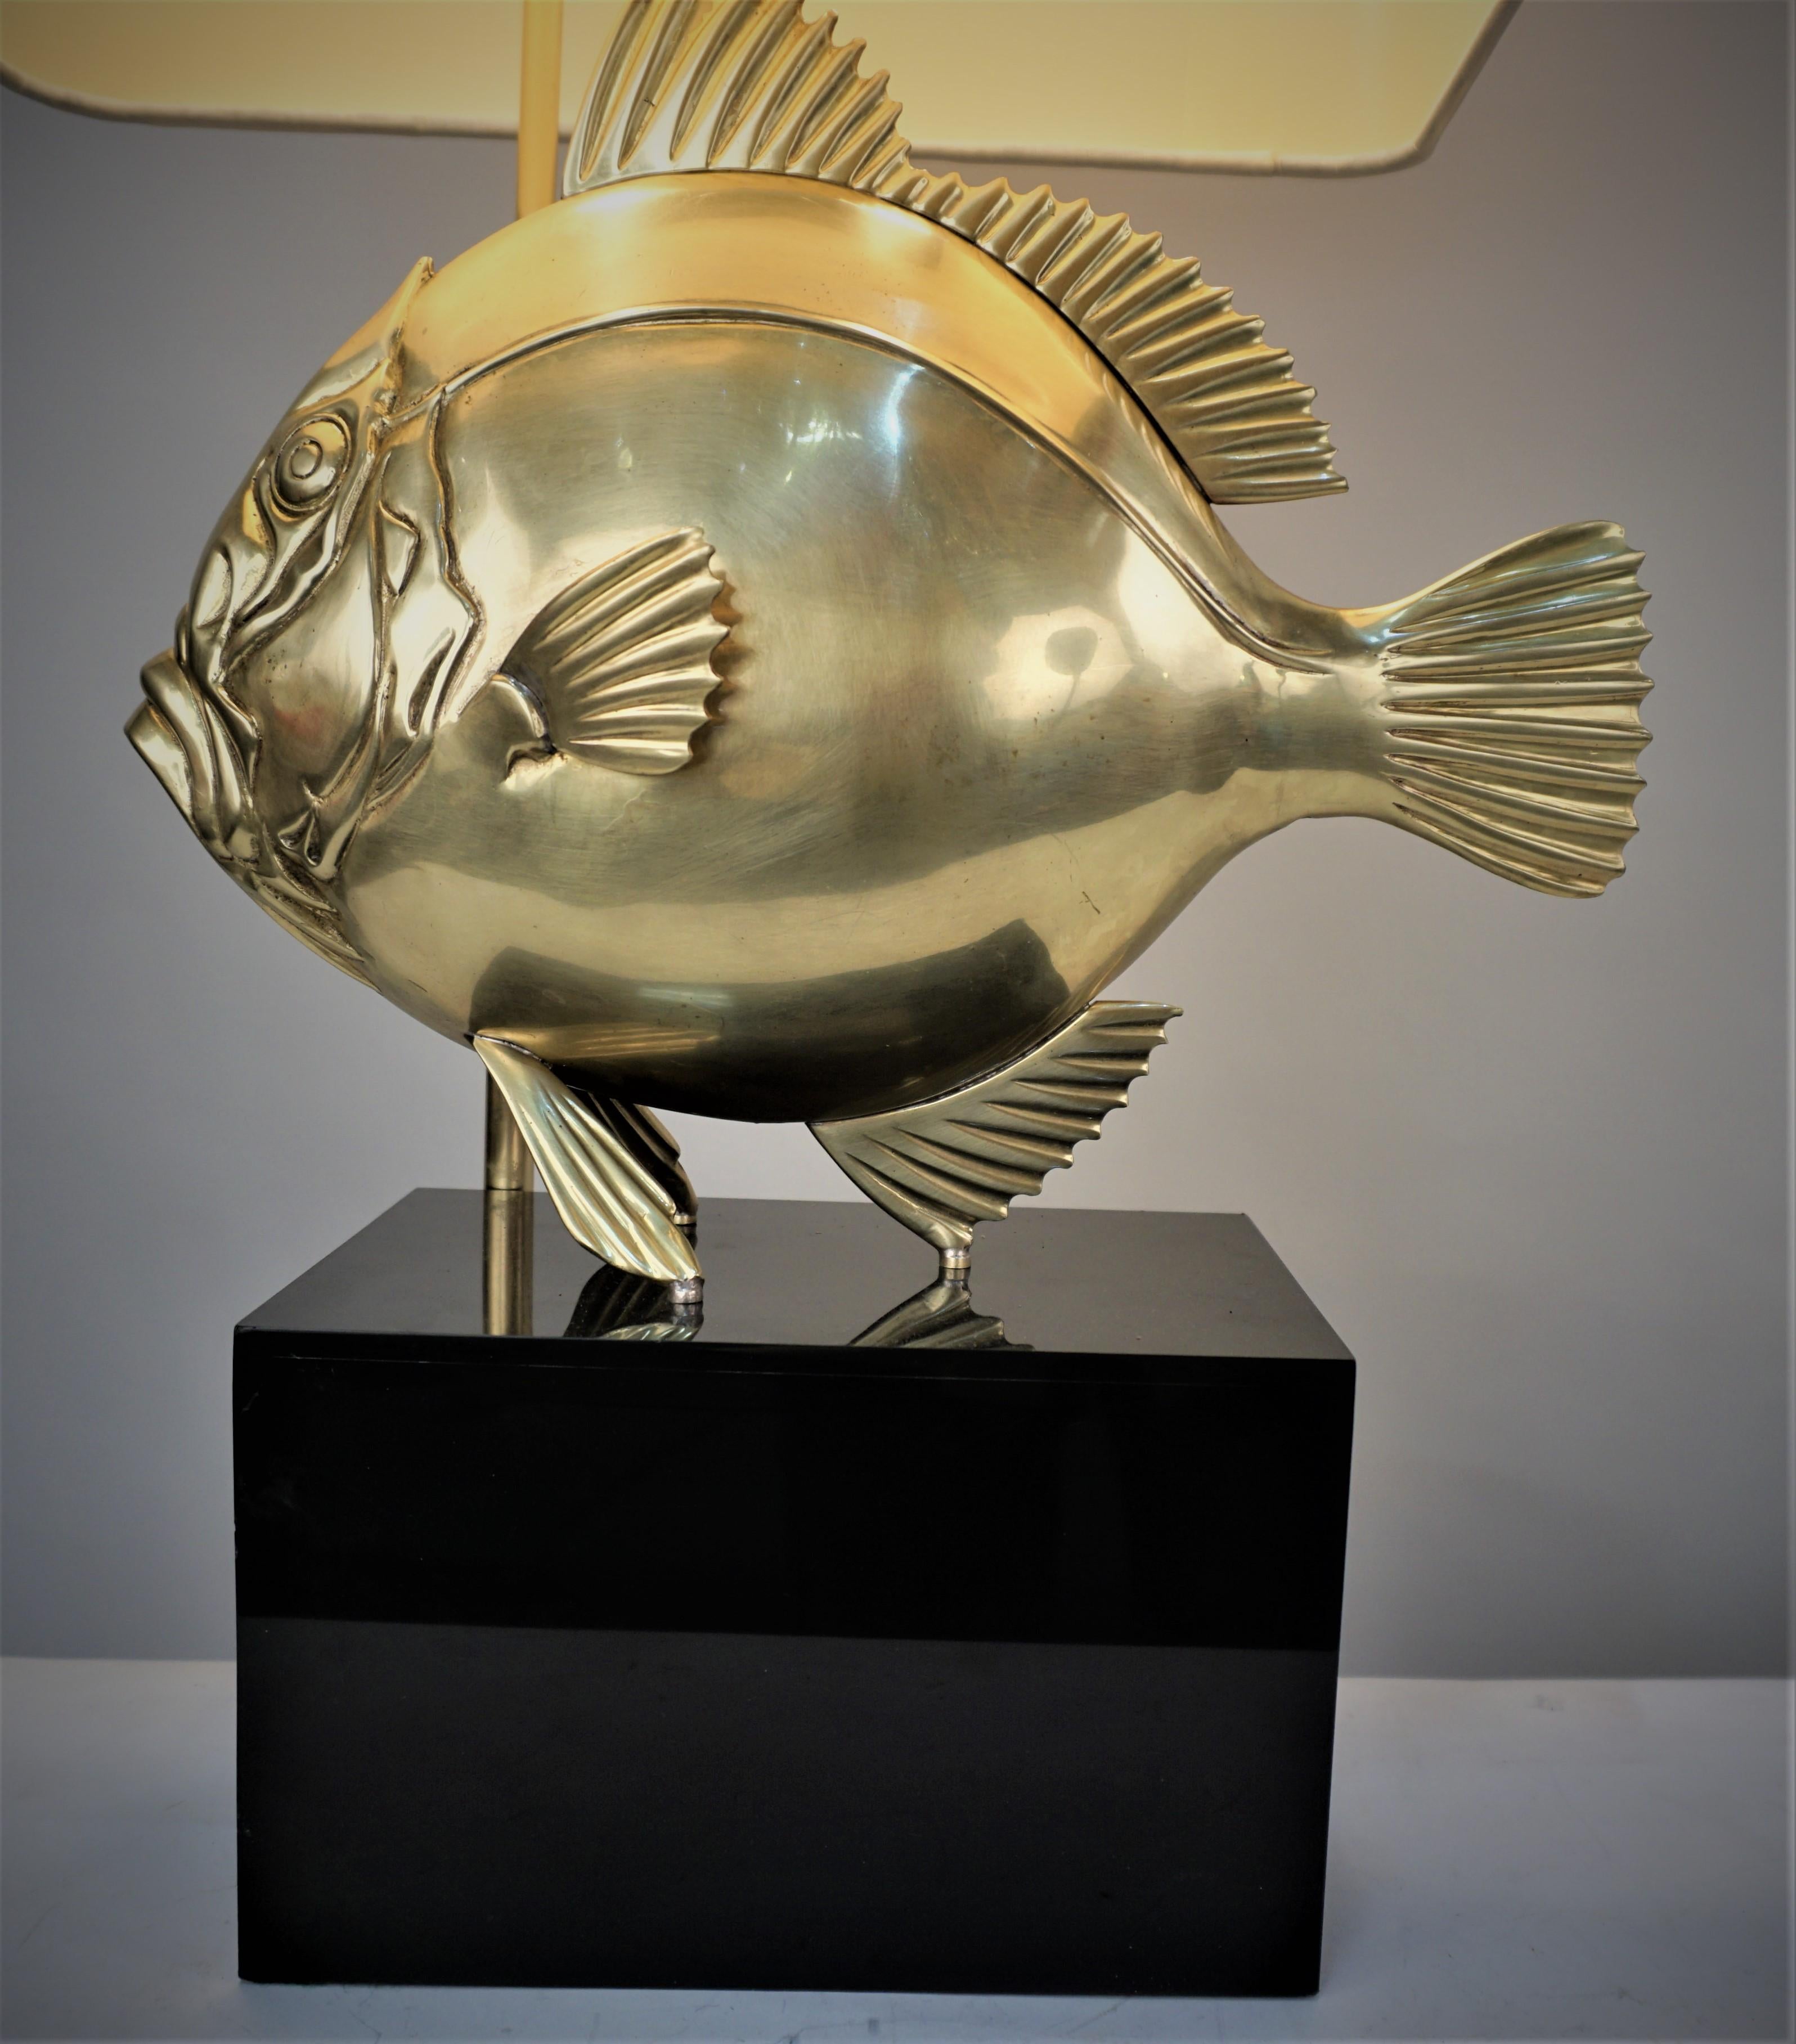 Bronze fish lamp on Lucite base fitted with oblong silk hardback lampshade.
Measurements includes the lampshade.